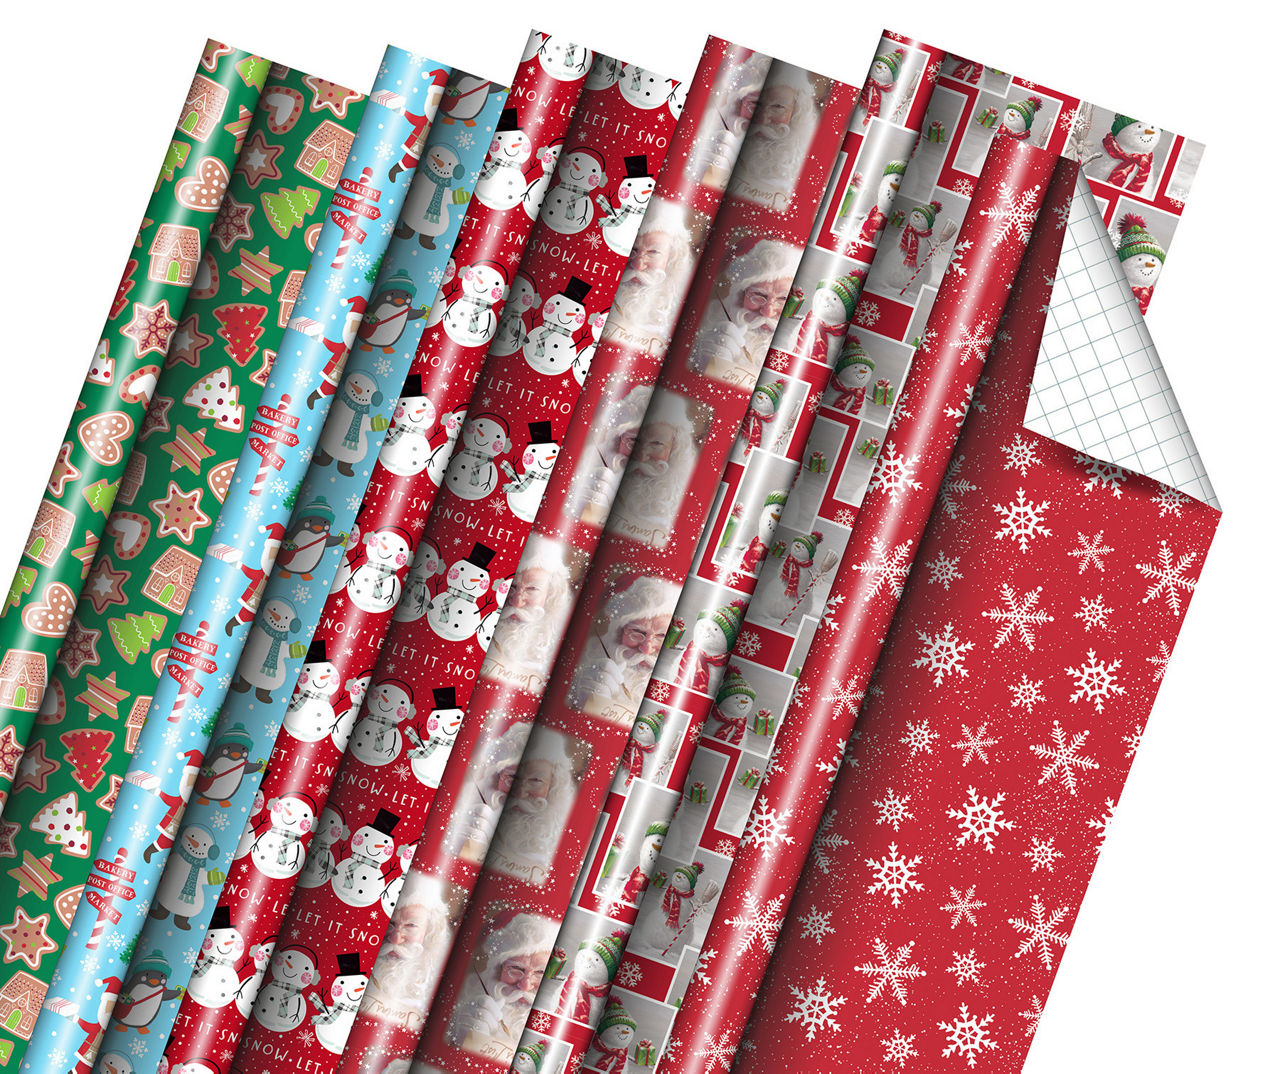 Lot of 18 Rolls of Christmas Wrapping Paper